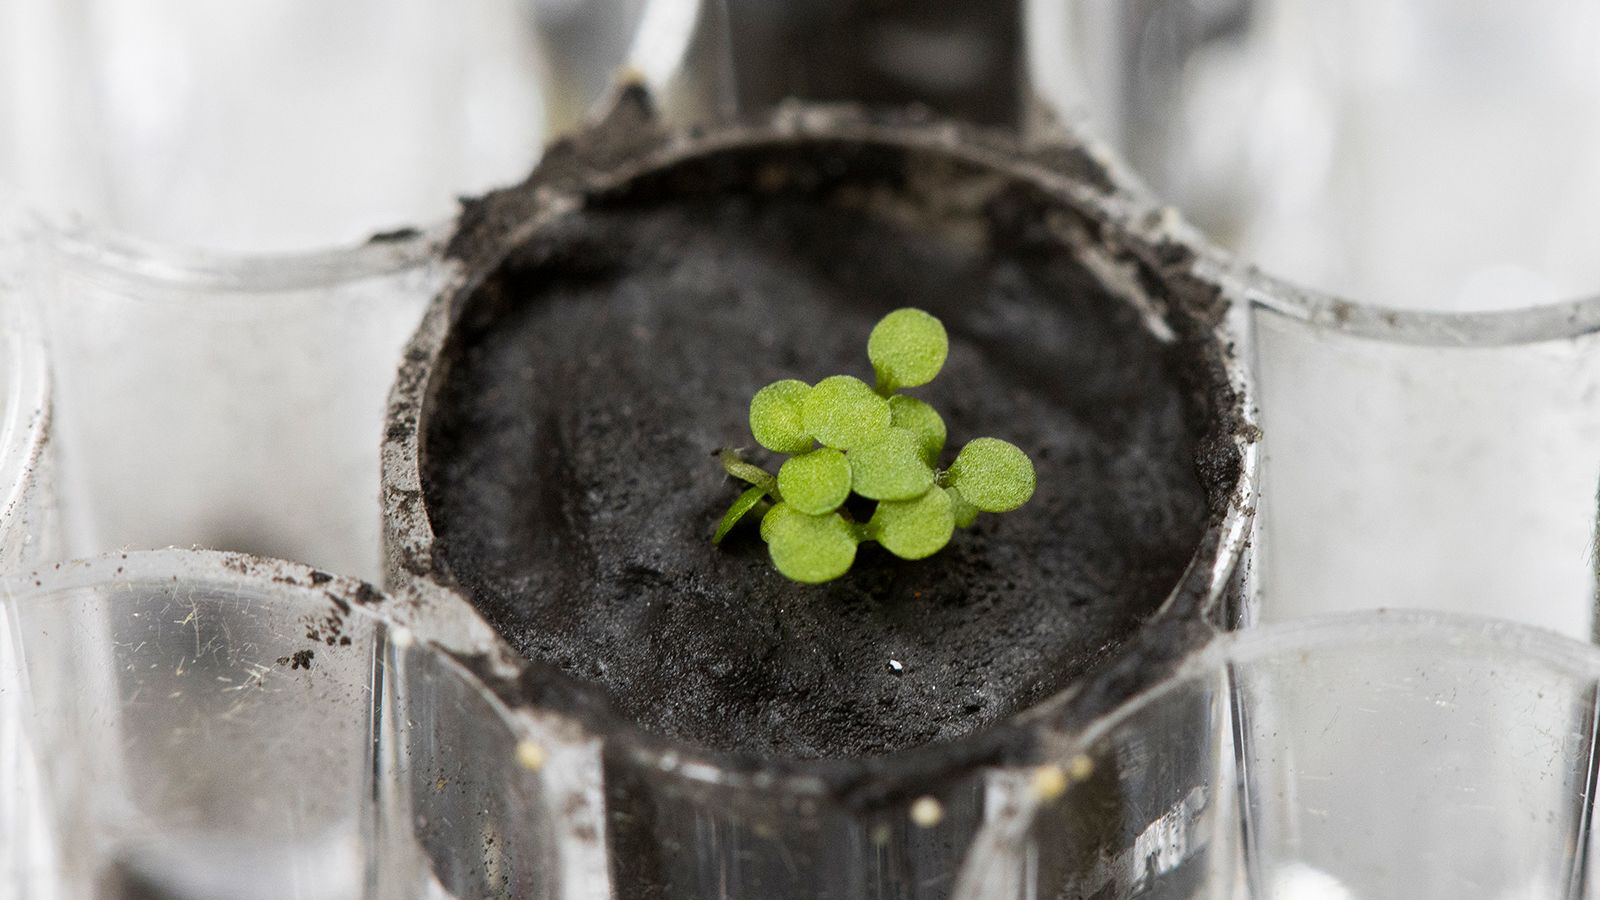 Arabidopsis thaliana plants, commonly known as thale cress, are shown sprouting from lunar soil.